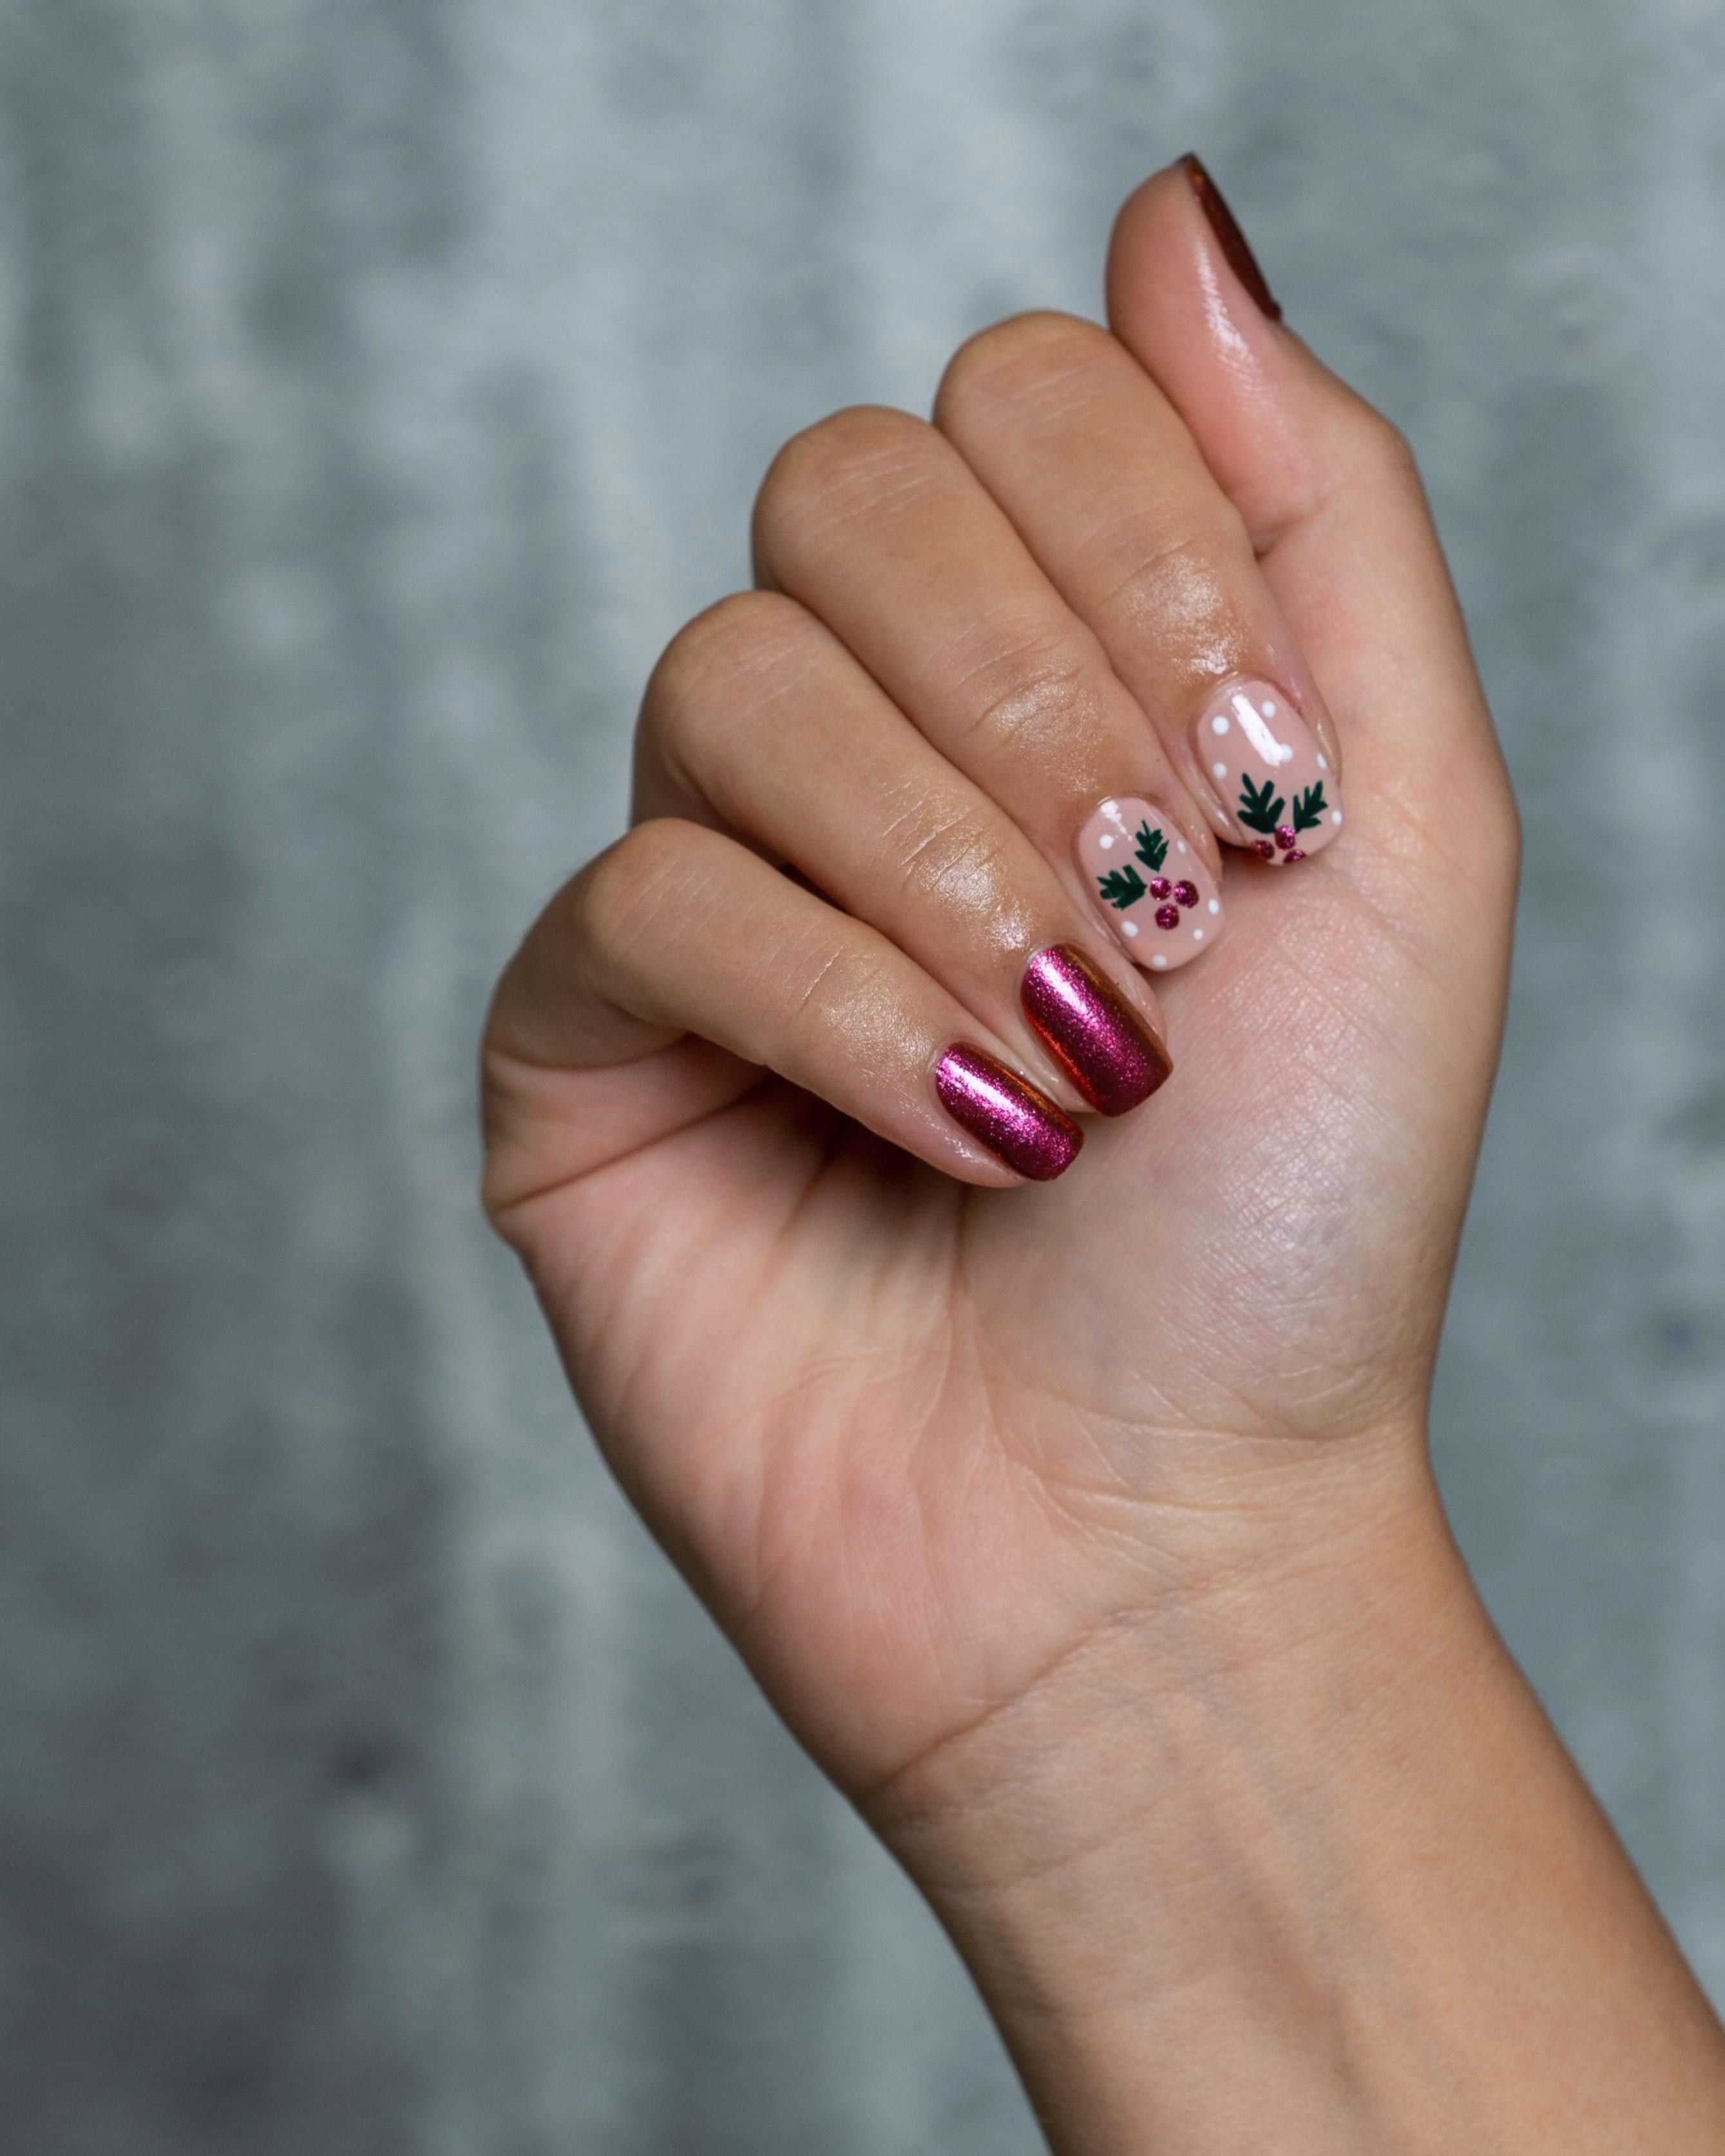 50 Winter Nails For 2022 - Brit + Co